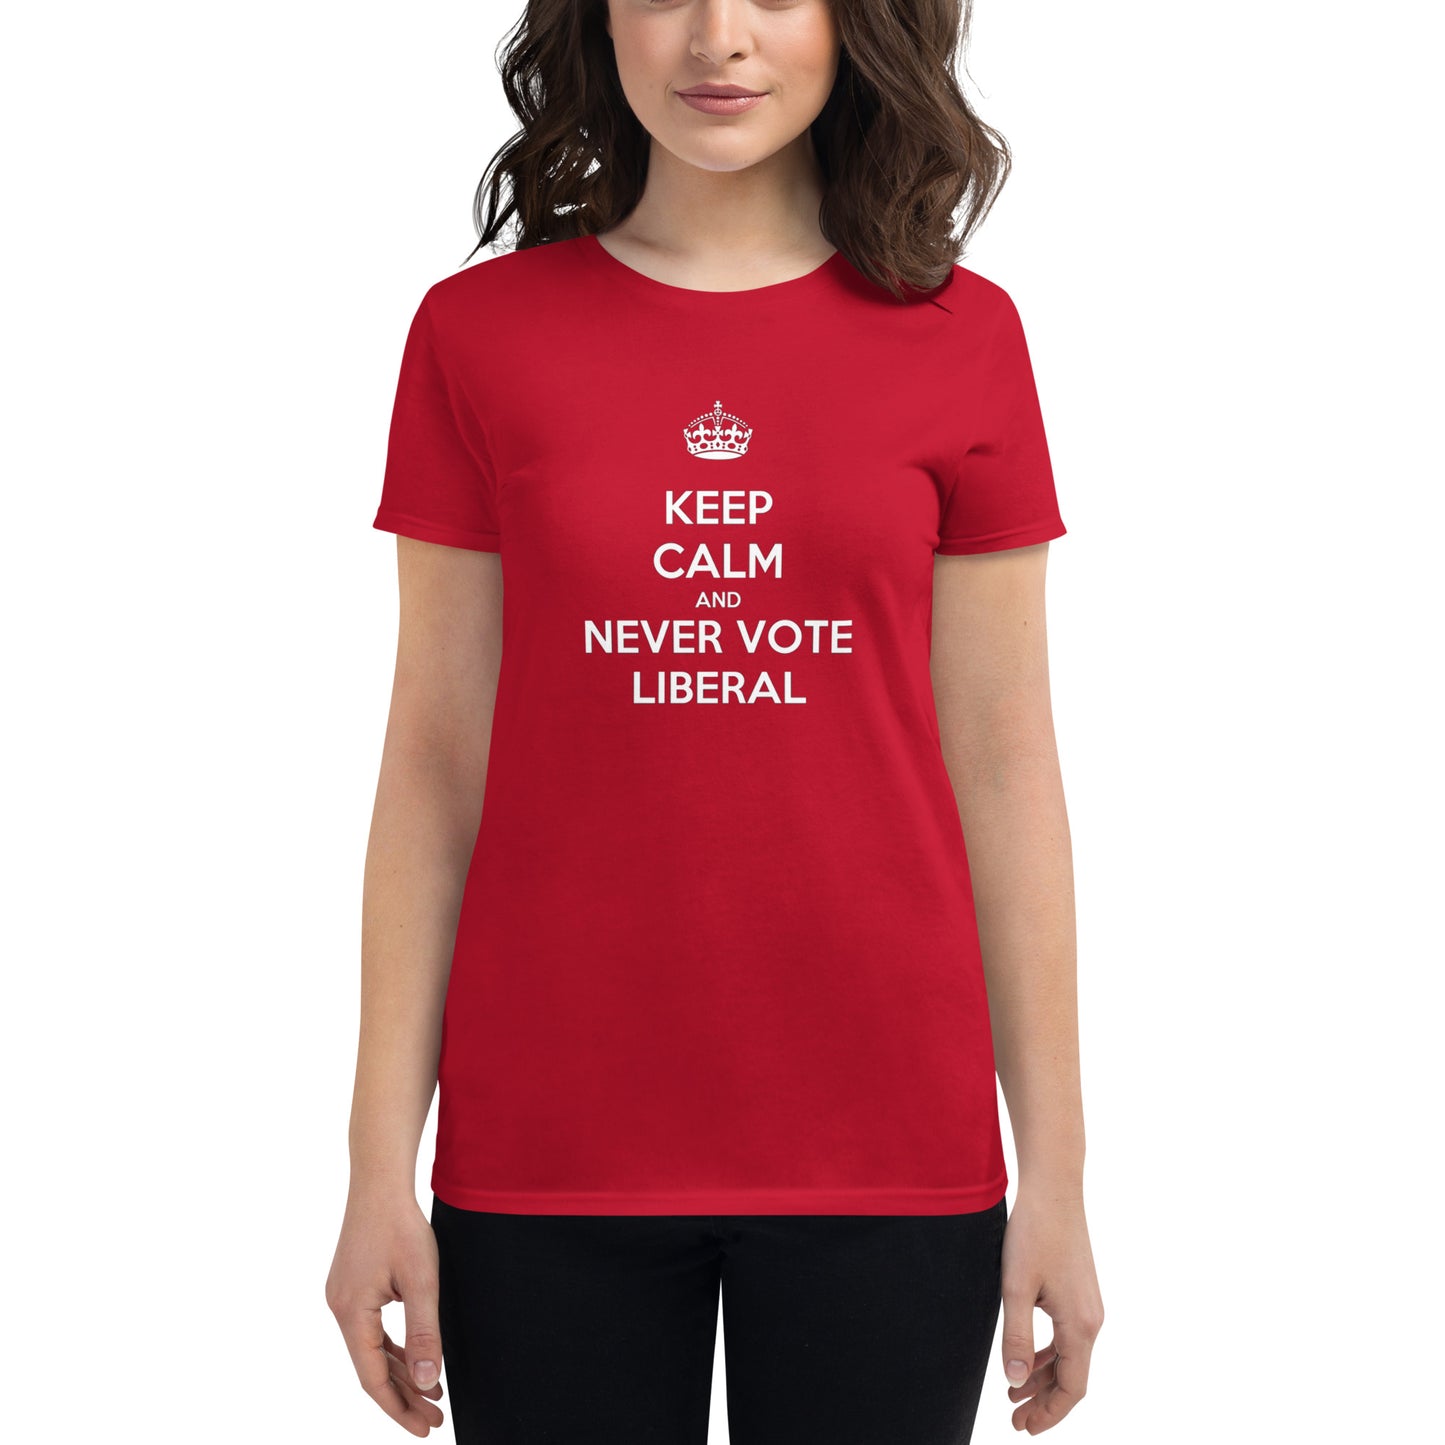 Keep Calm And Never Vote Liberal Women's T-Shirt